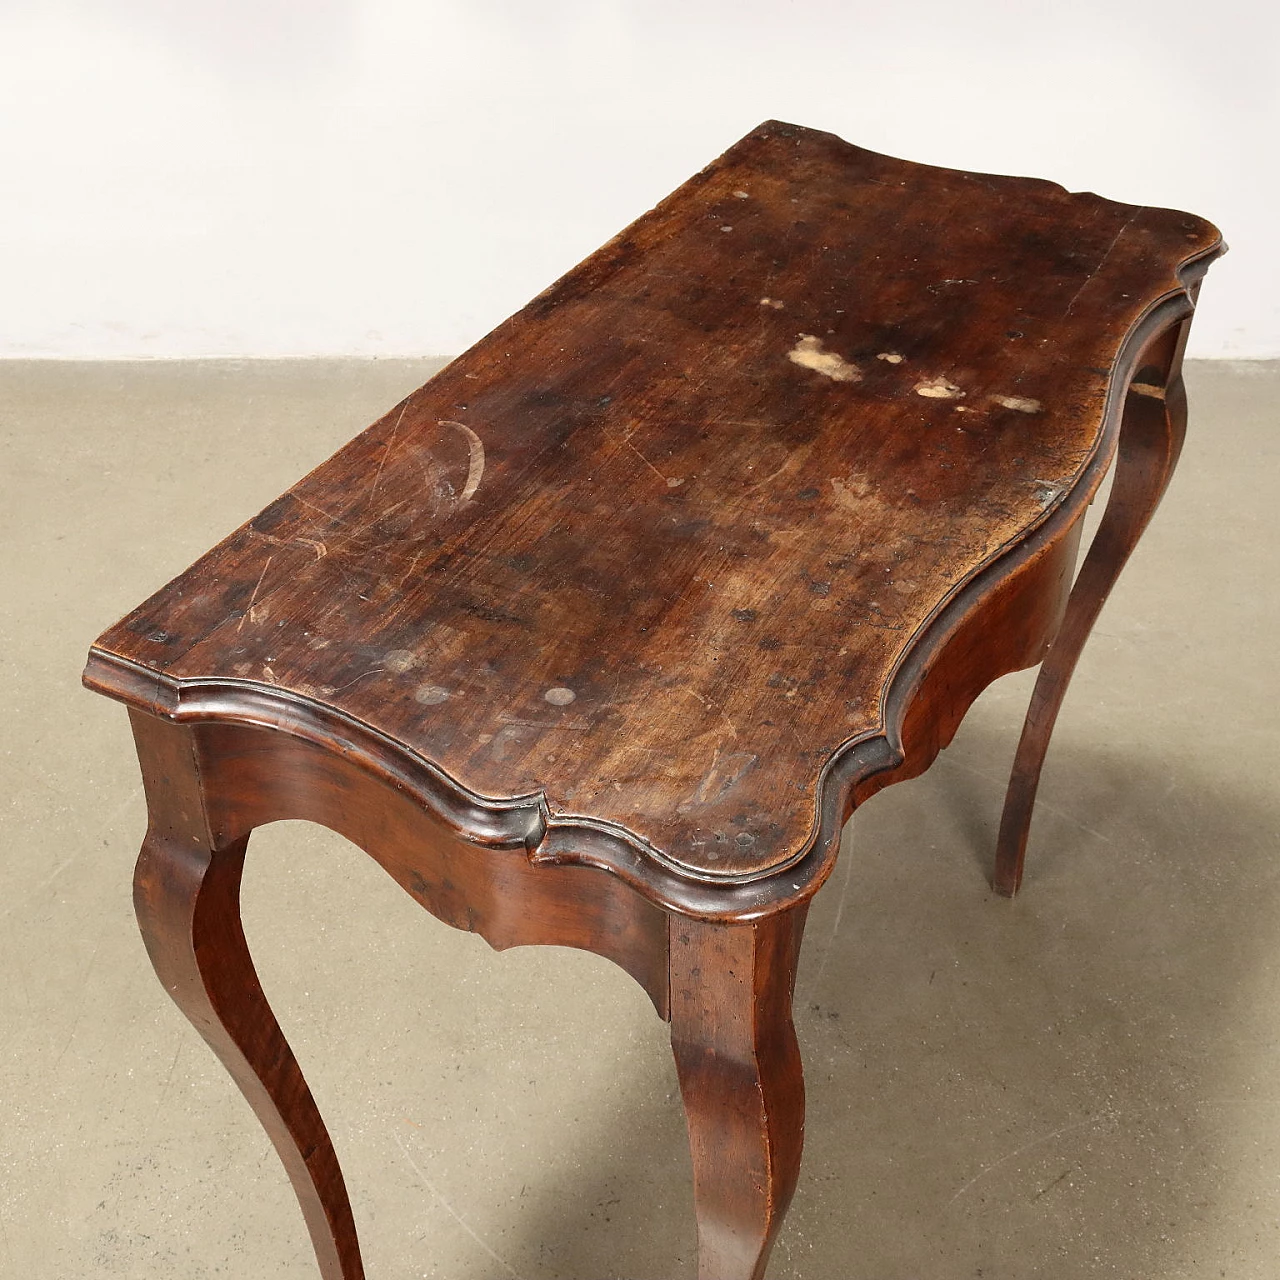 Console in cherry wood with walnut top and wavy legs, 18th century 6